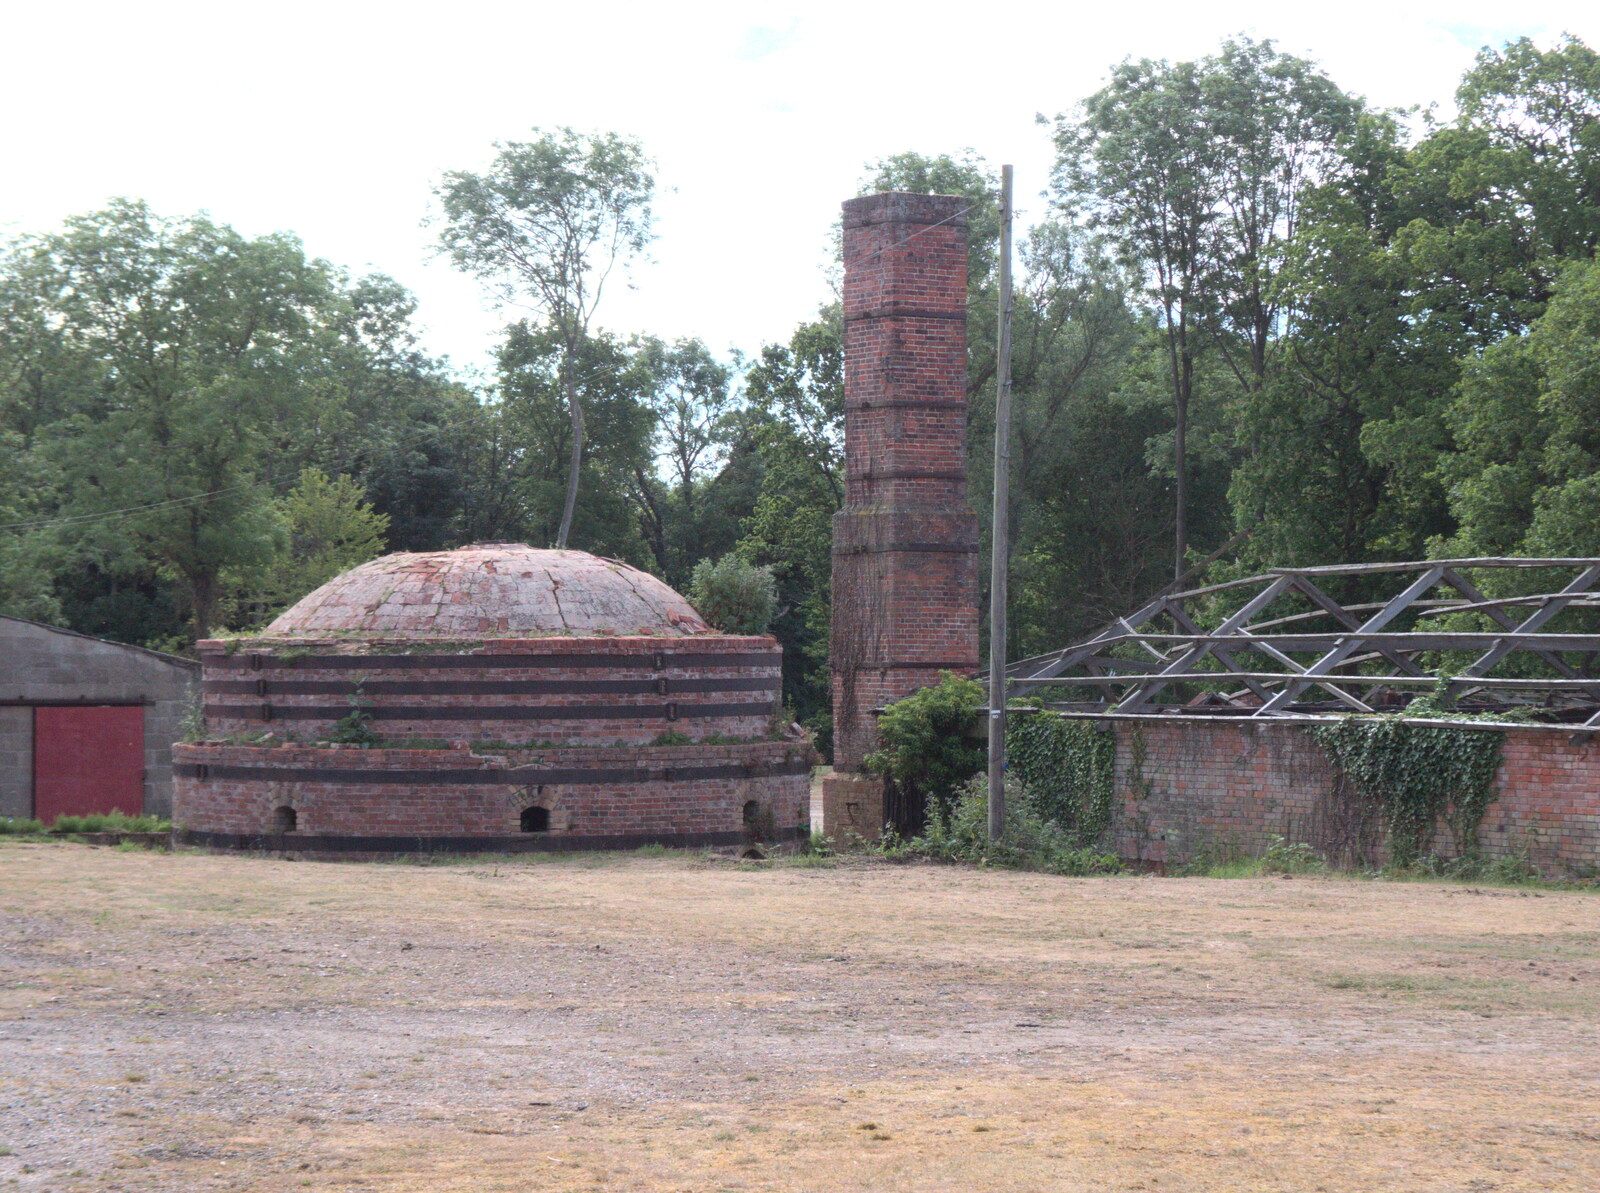 The round kiln of the old Hoxne Brickworks from The Old Brickworks and a New Road, Hoxne and Eye, Suffolk - 26th May 2020